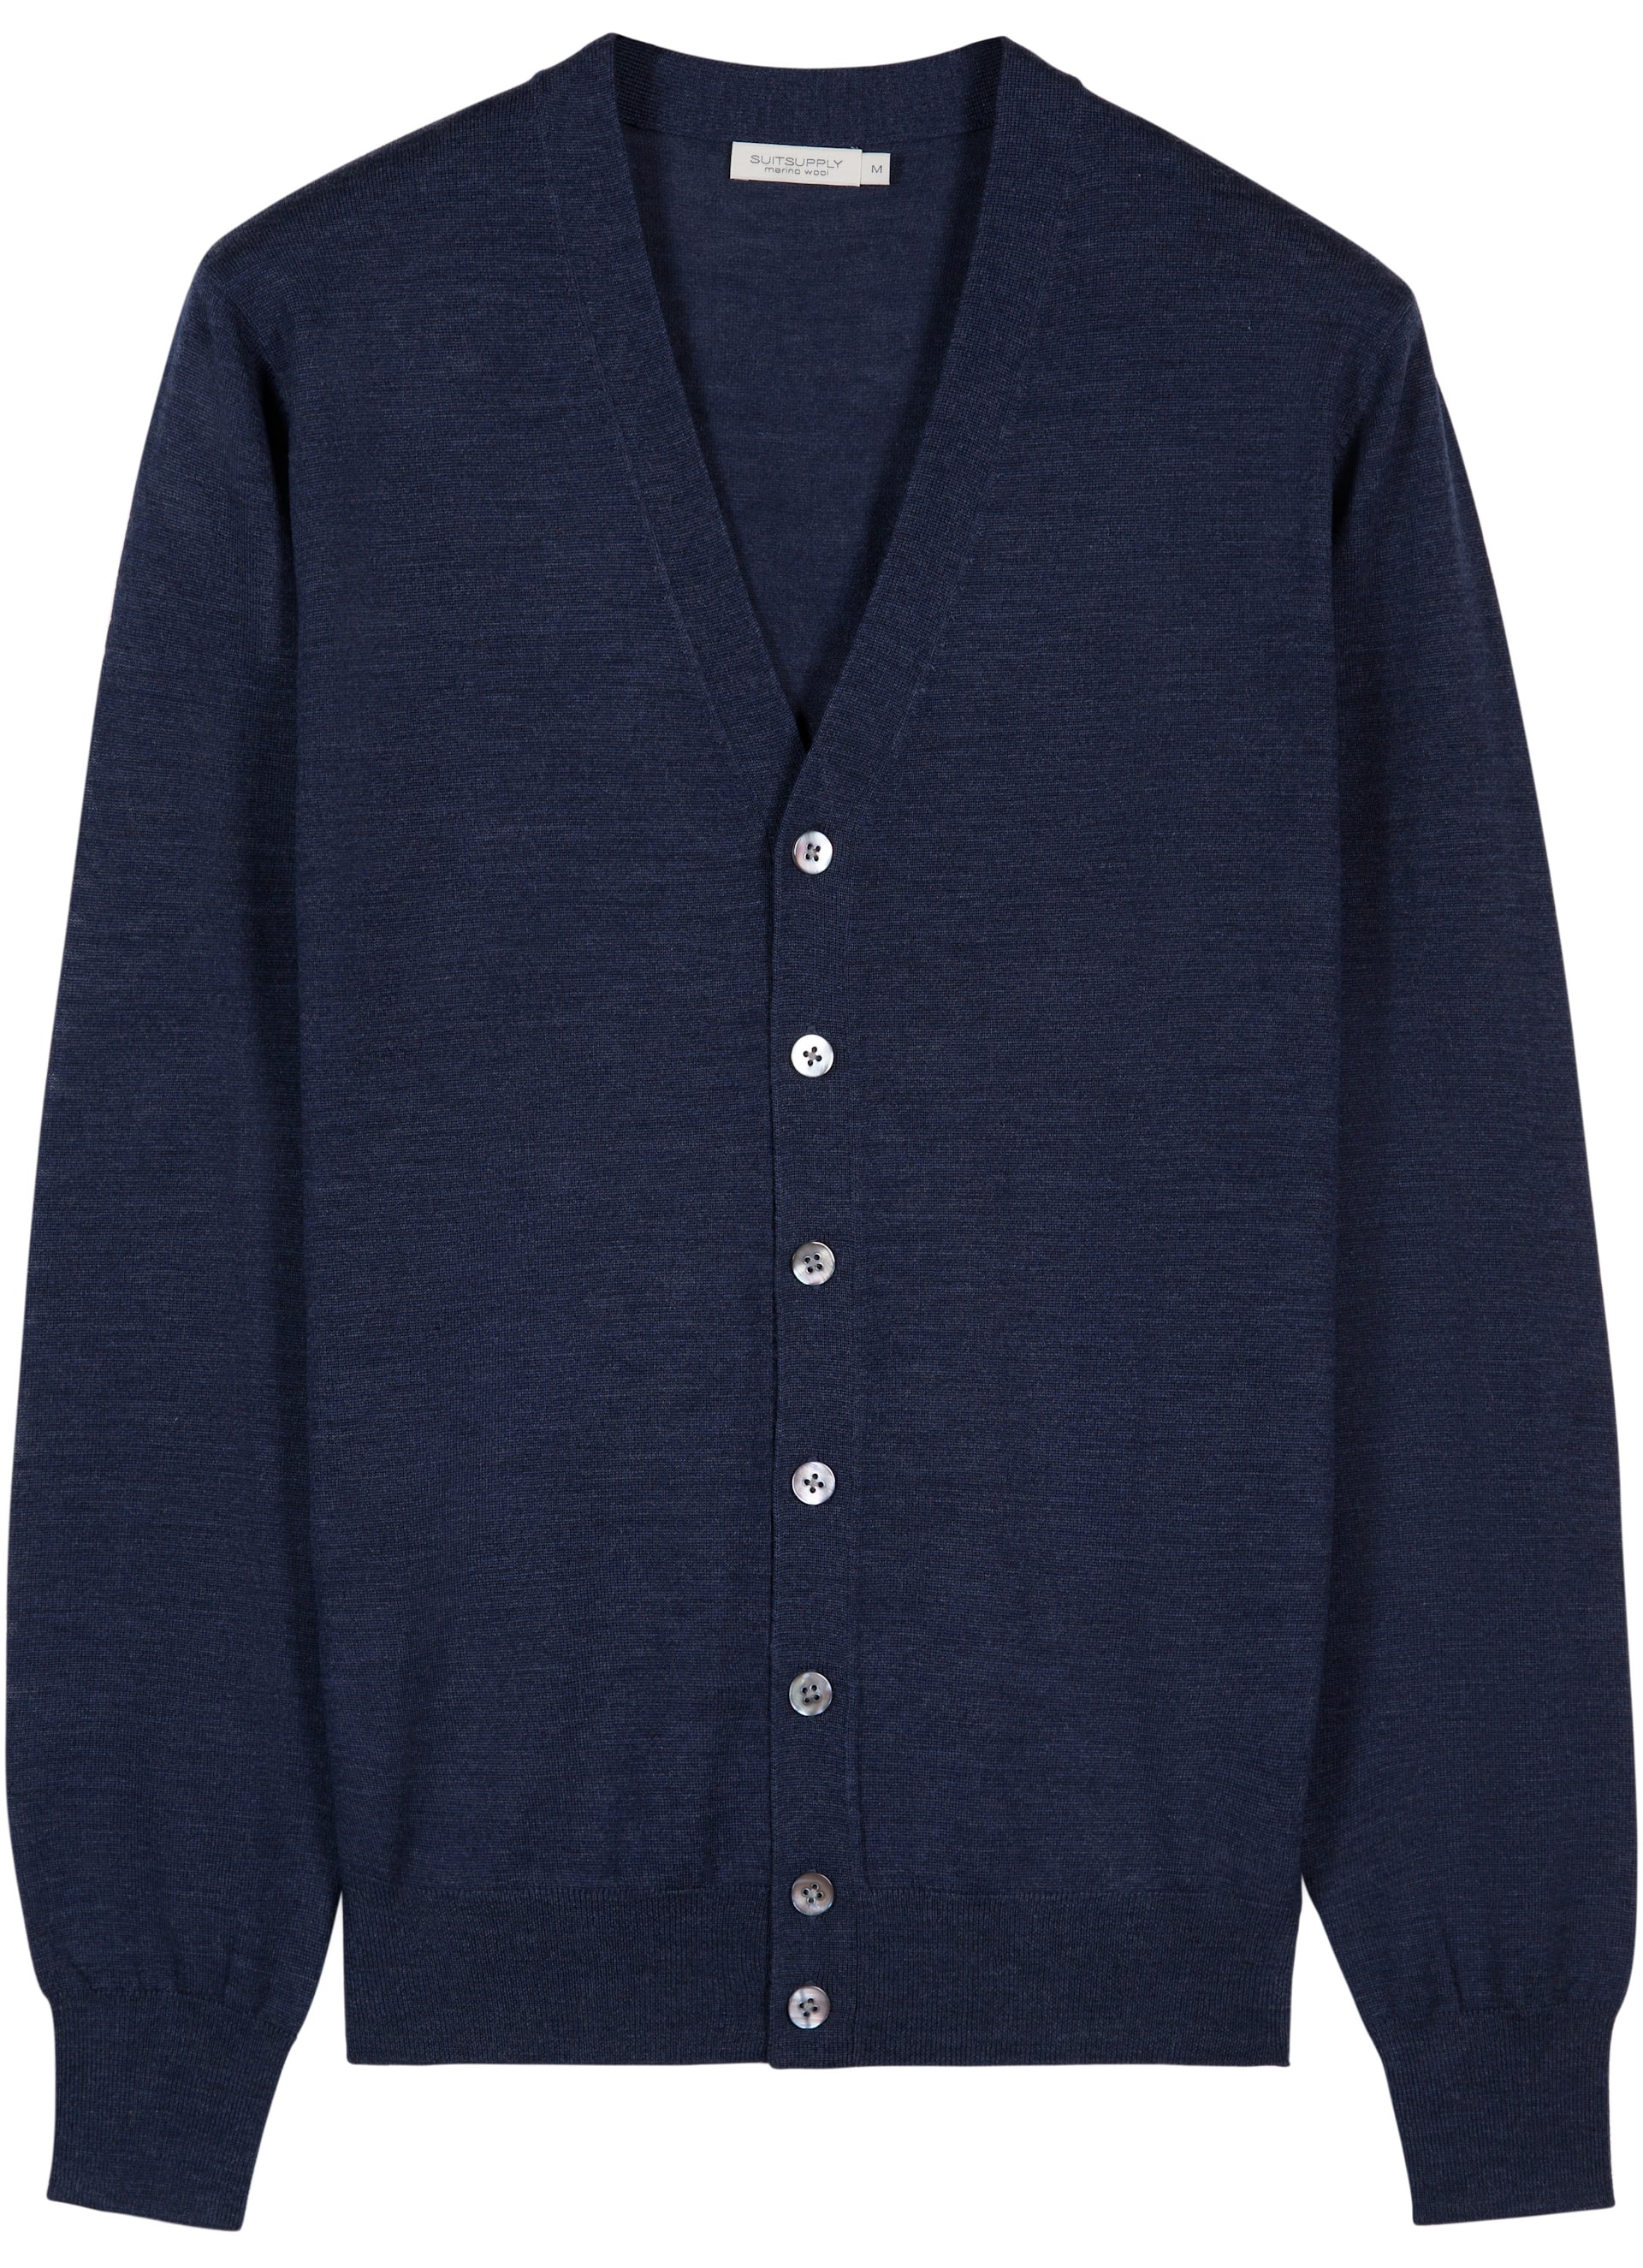 Blue Cardigan Sw761 | Suitsupply Online Store